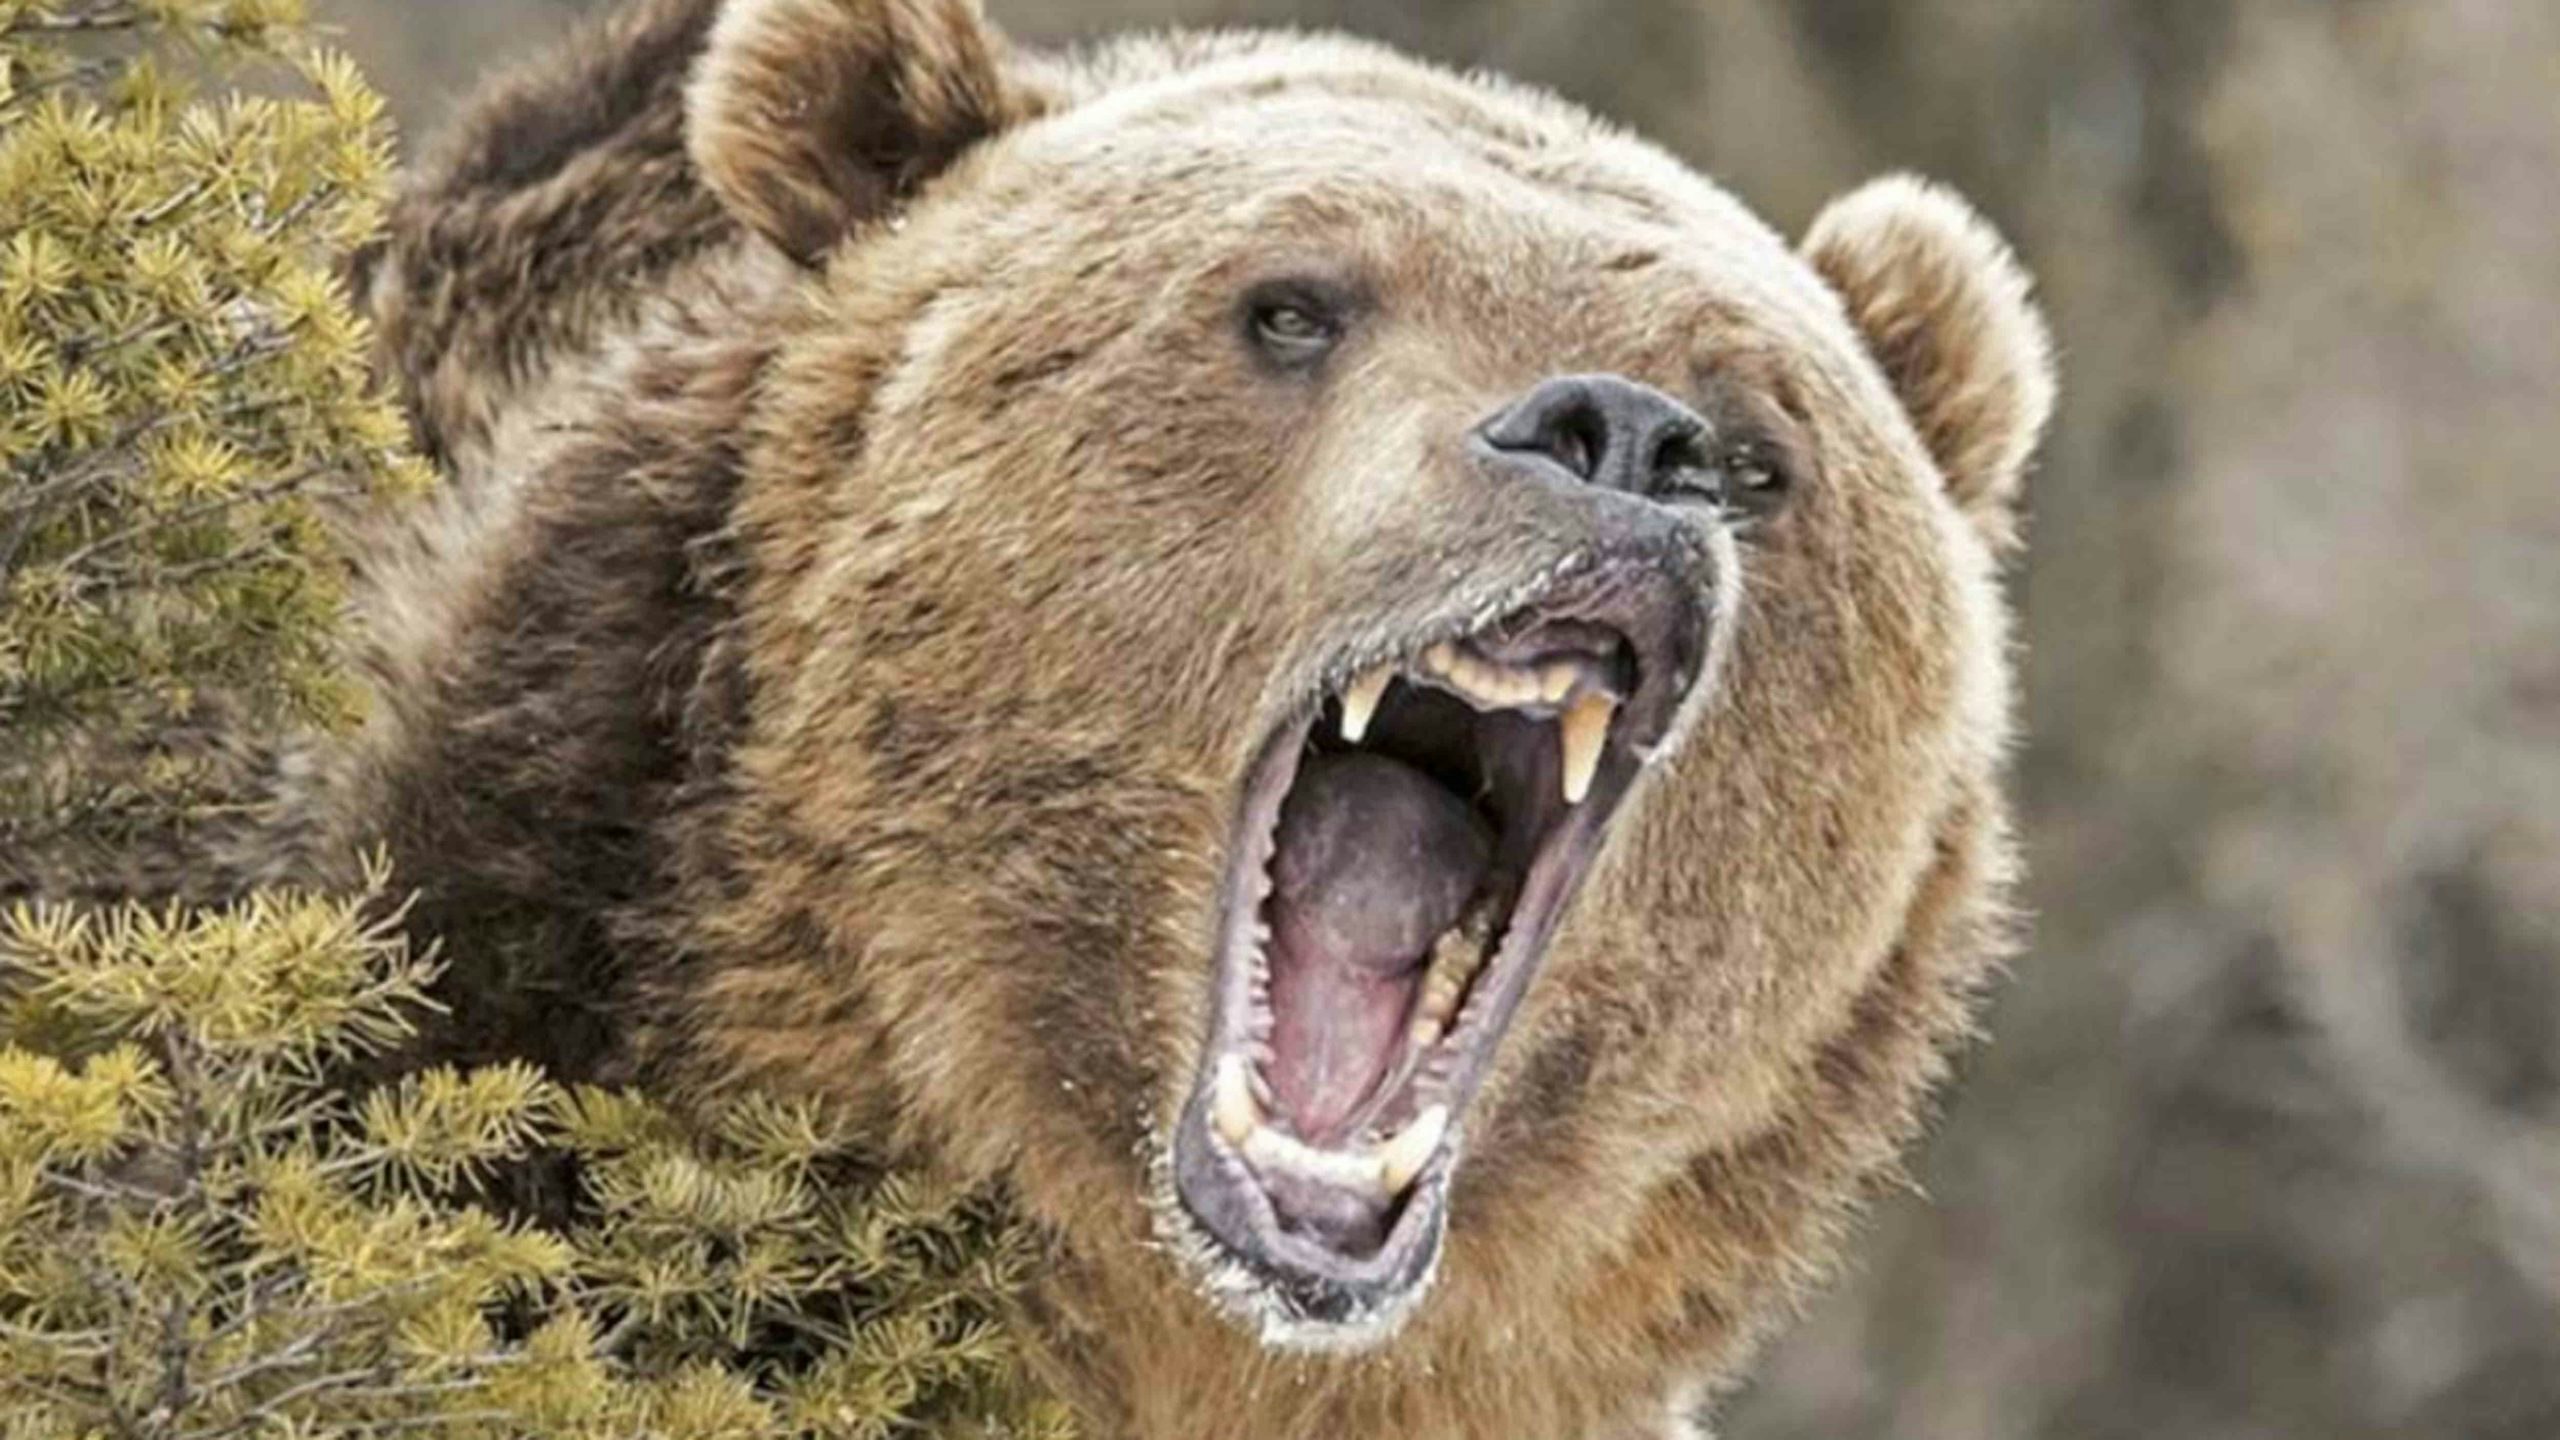 To Stop A Grizzly And How Bear Spray Saved A Life